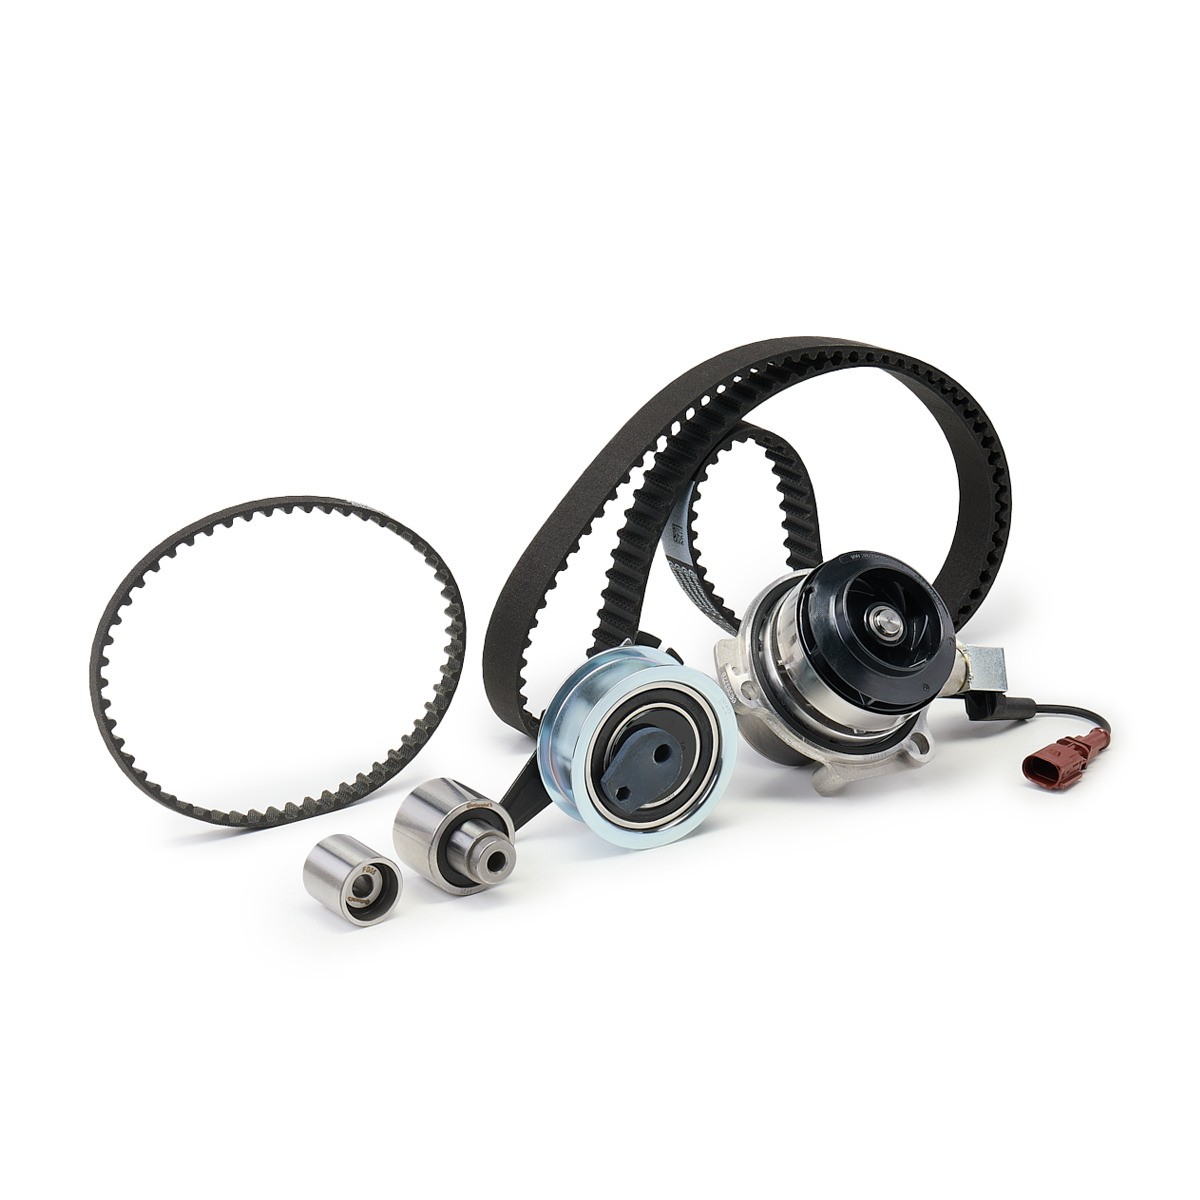 Seat TARRACO Engine cooling system parts - Water pump and timing belt kit CONTITECH CT1168WP8PRO